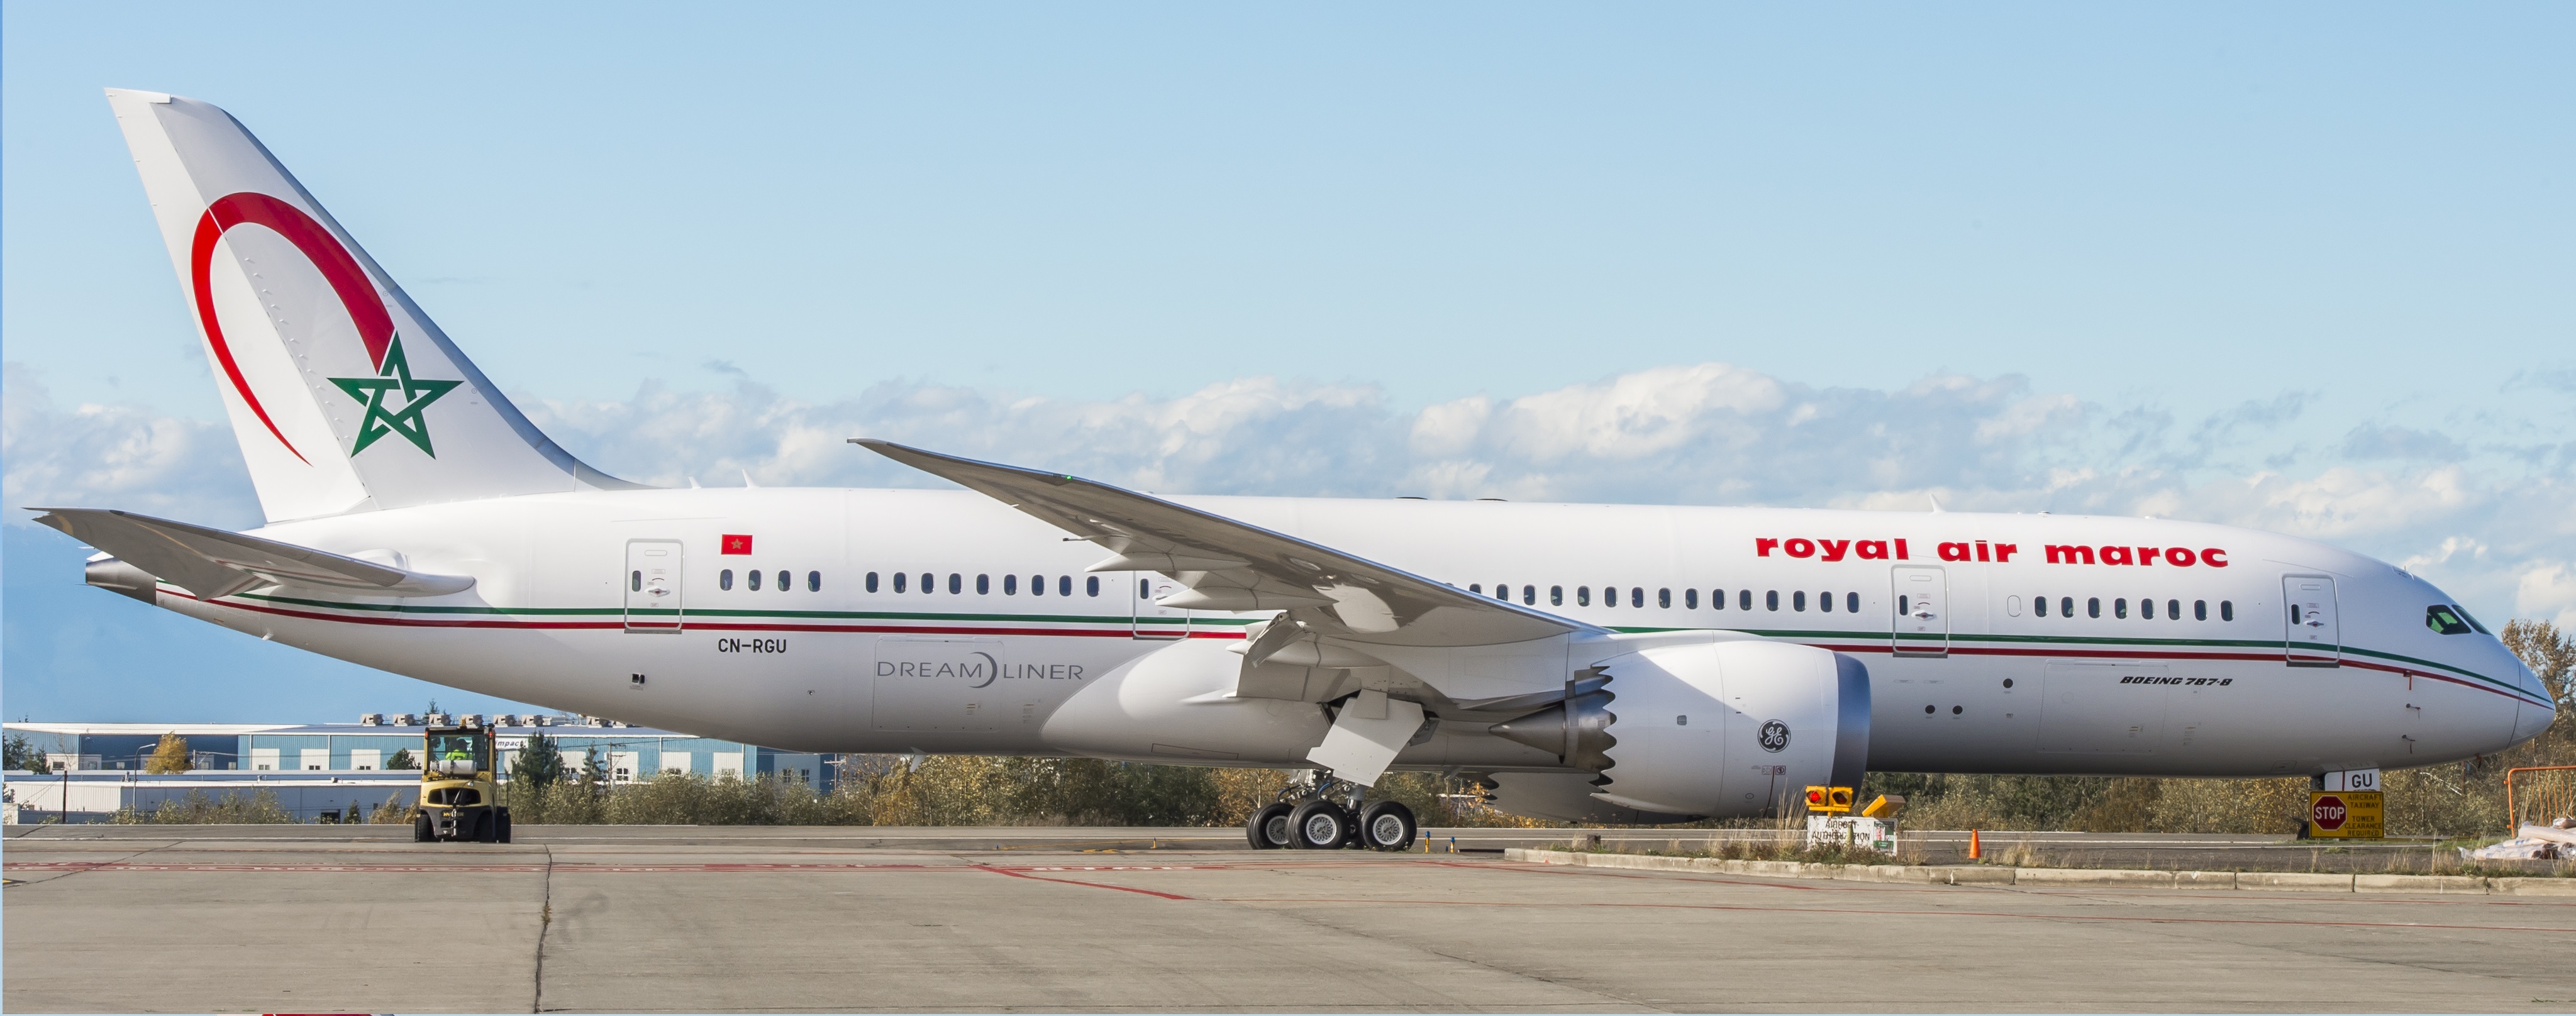 Royal Air Maroc (RAM) 787-8 Assembly and Paint Photo/Video
CLOW SCOTT W (48973)
rms303782
nef2016